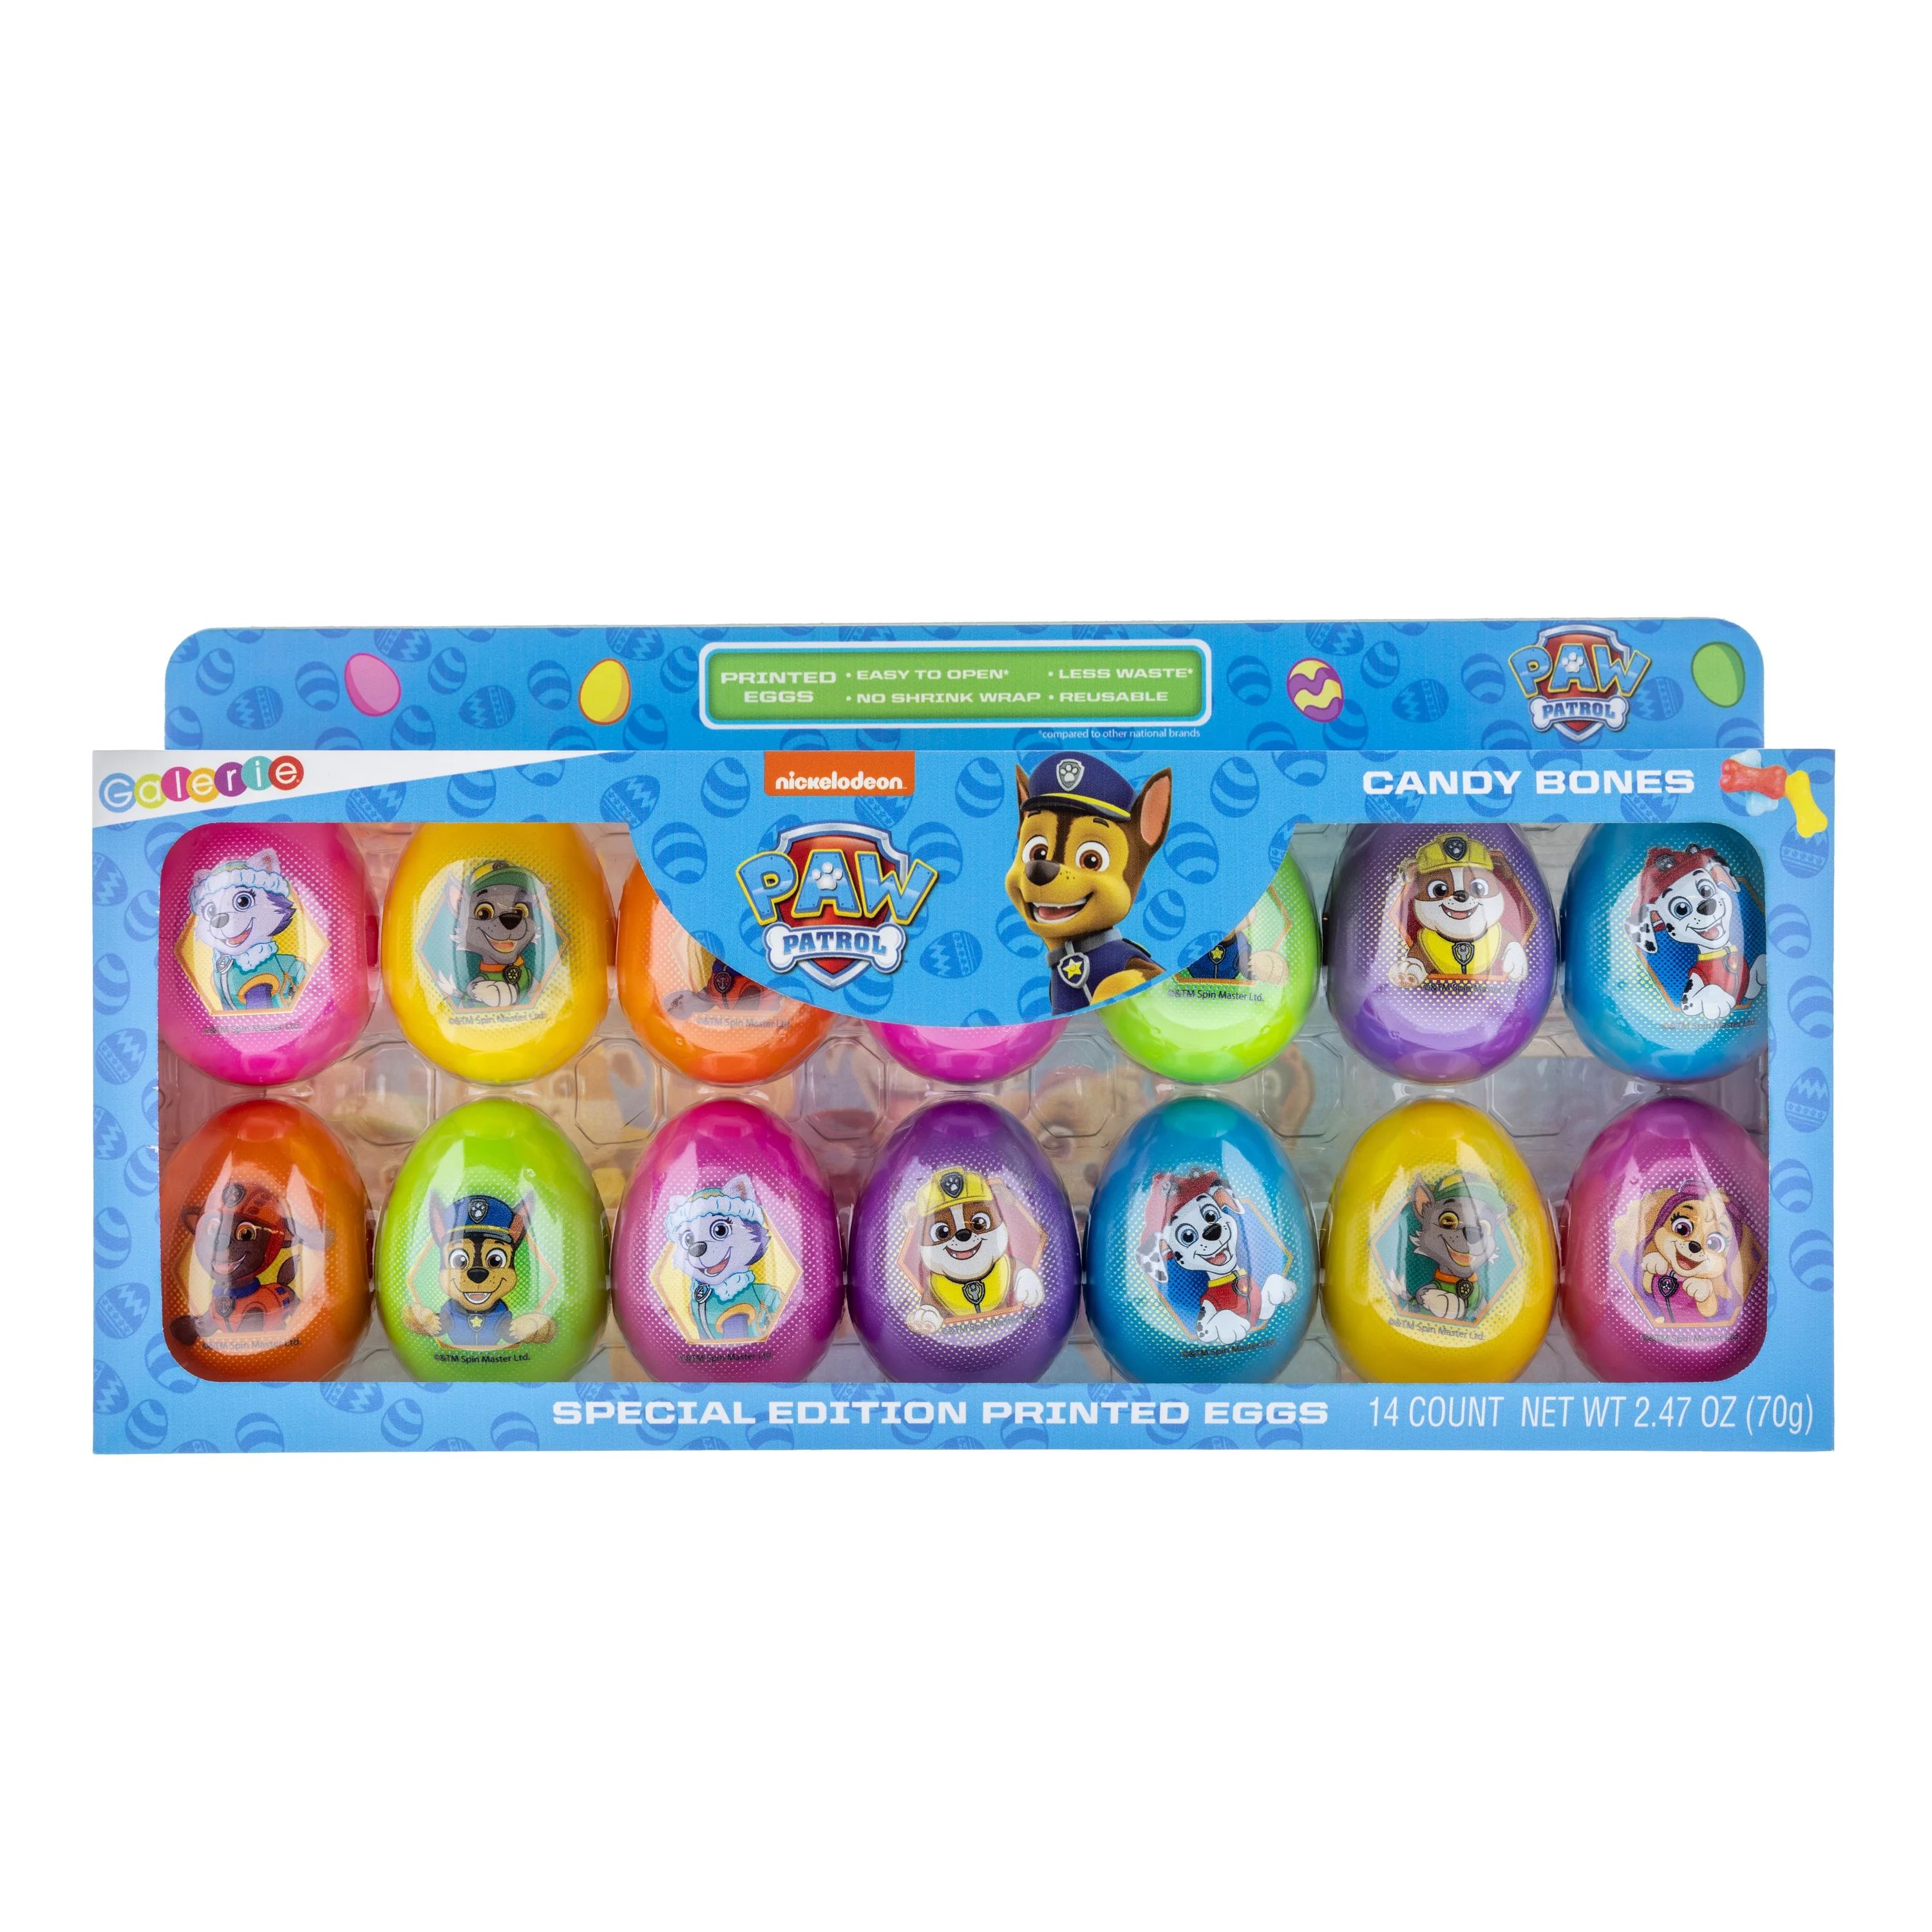 Galerie Nickelodeon Paw Patrol 14 Count Special Edition Printed Eggs with Candy, 2.47 oz | Walmart (US)